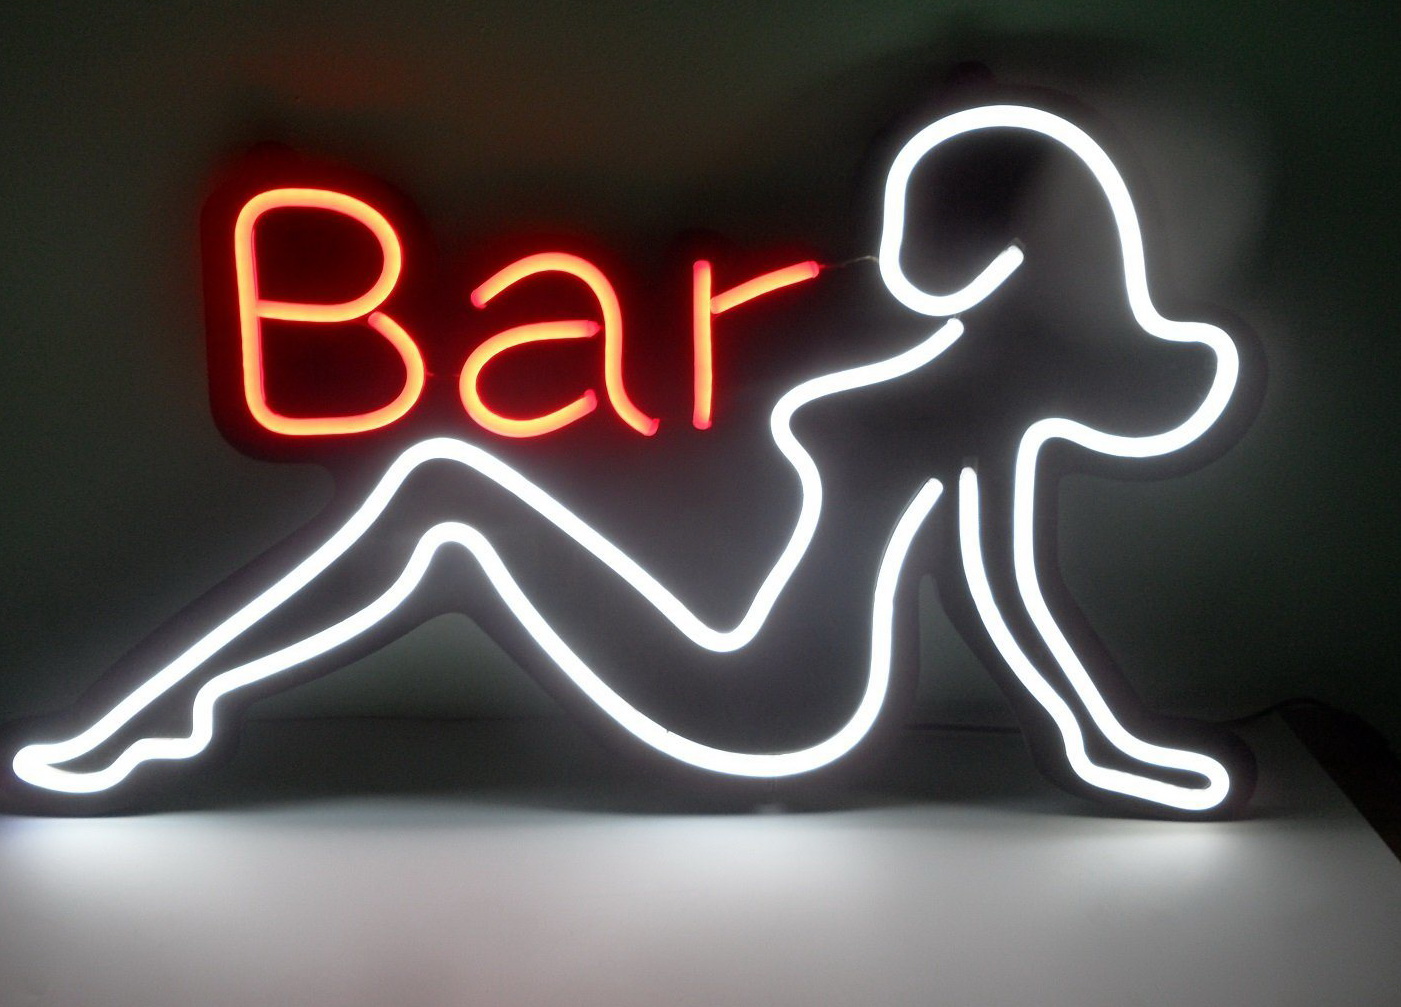 New Go Go bar for sale in patong